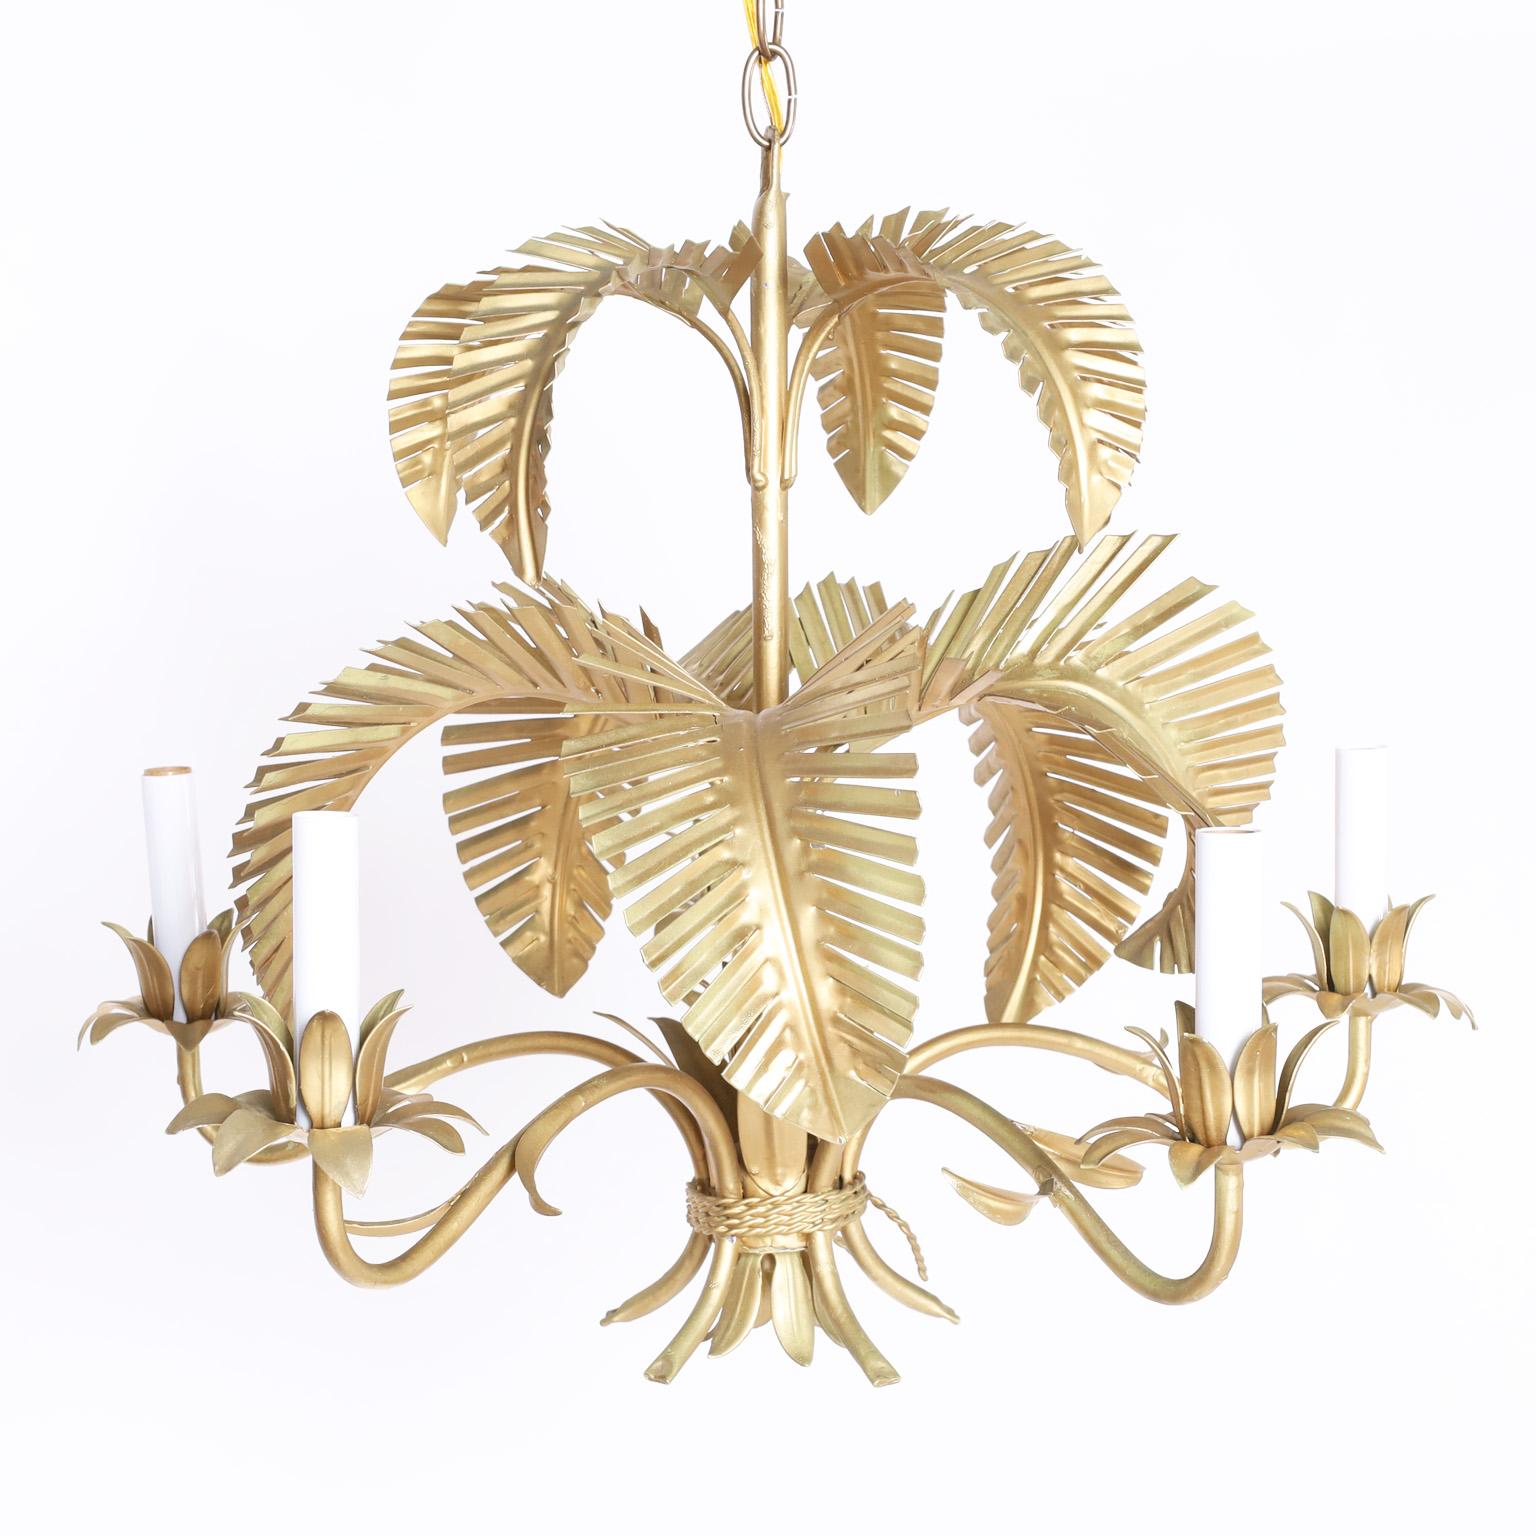 Midcentury six light chandelier with a chic gold finish over metal having a palm frond motif and leaf candle cups and bobeches.